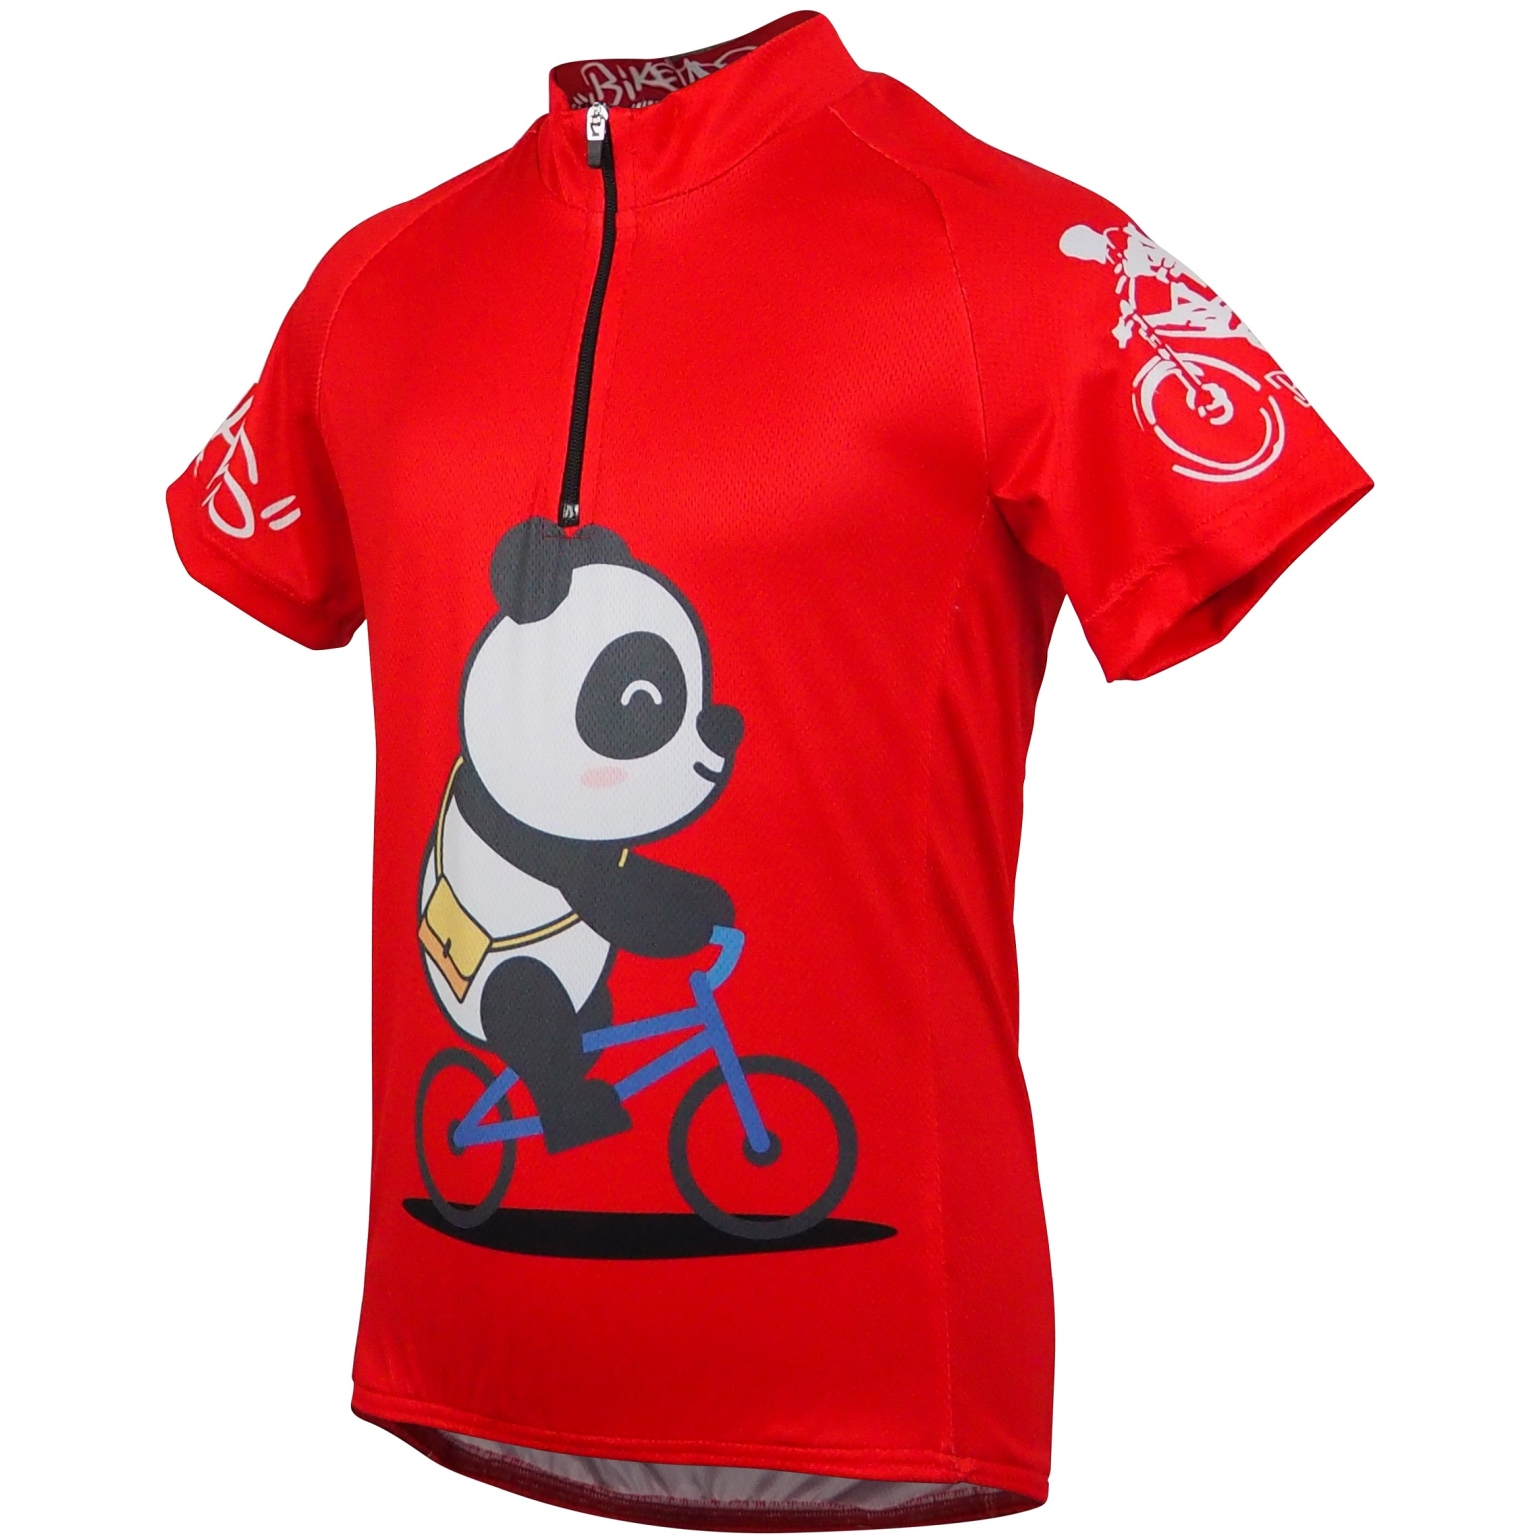 Picture of Biketags Cycling Jersey Kids - Panda Red